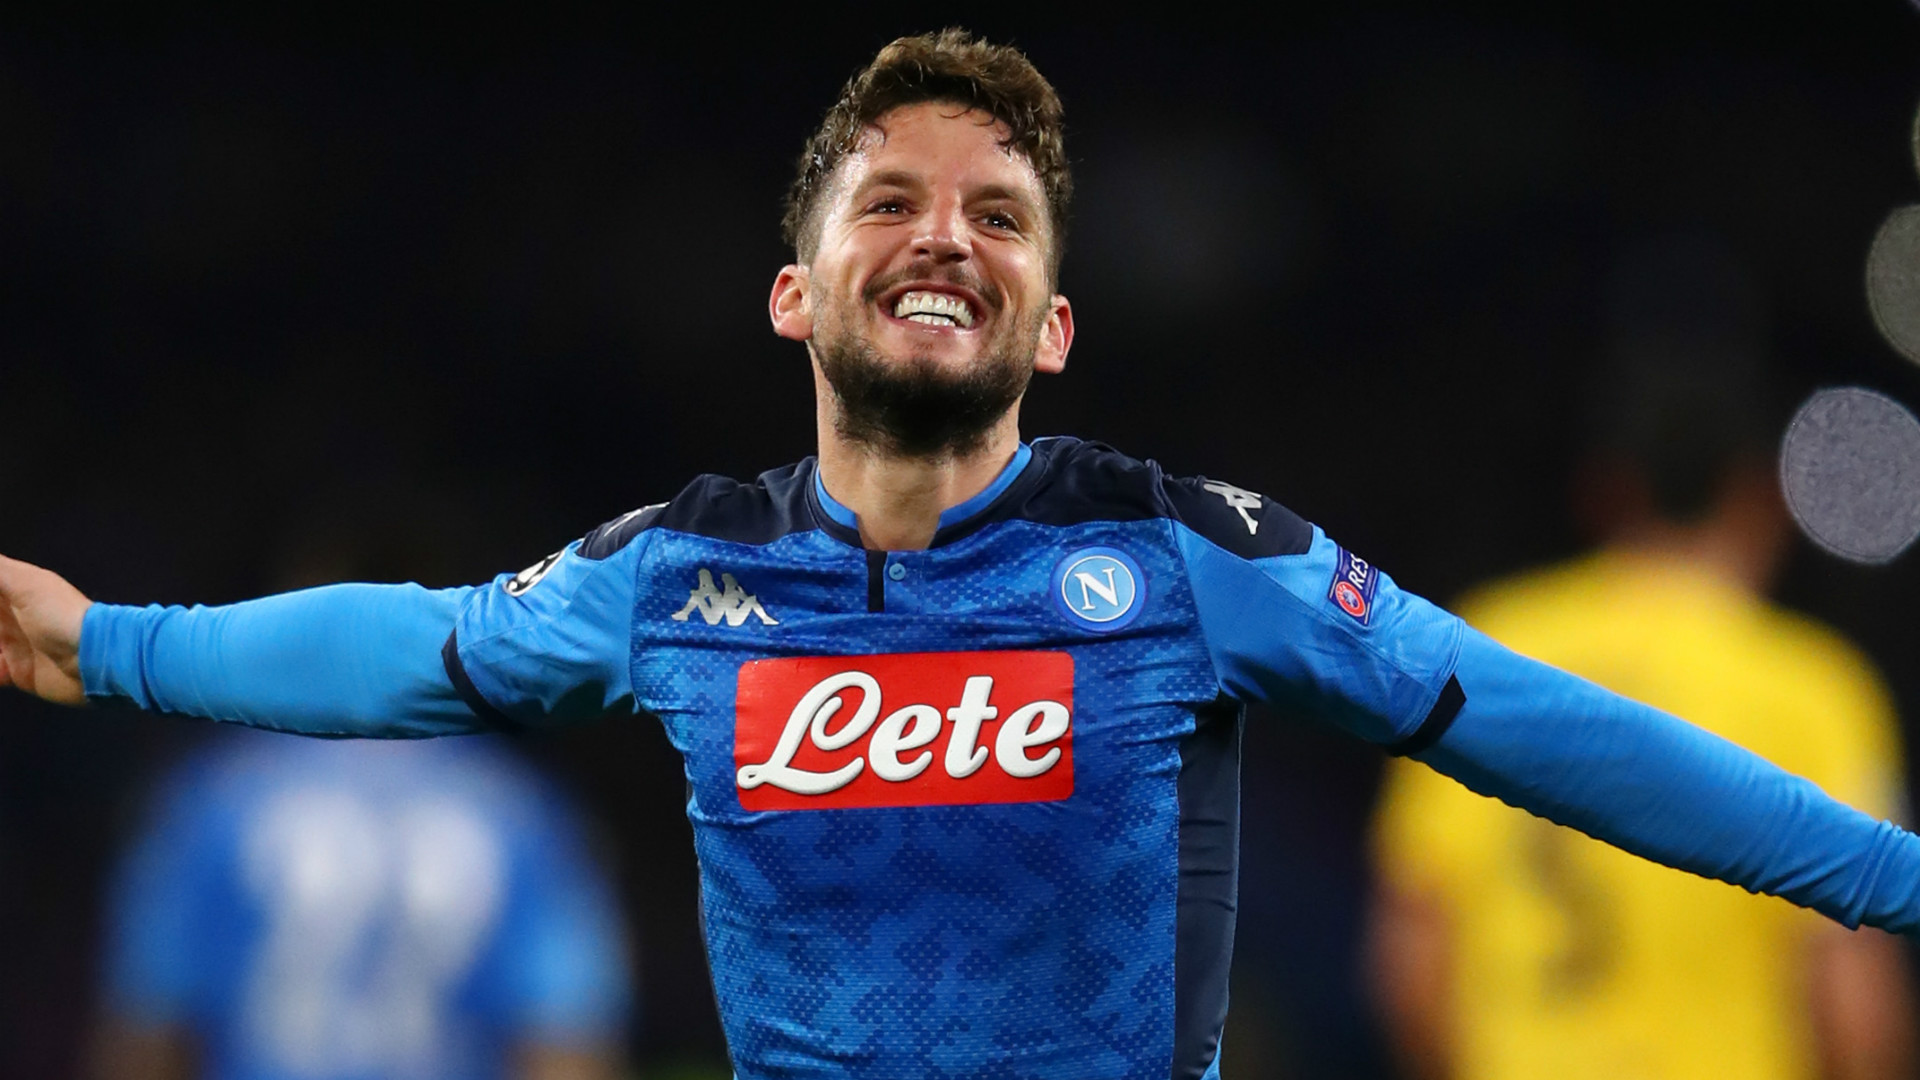 A possible transfer of Dries Mertens to Stamford Bridge ahead of the 2020-21 seasons